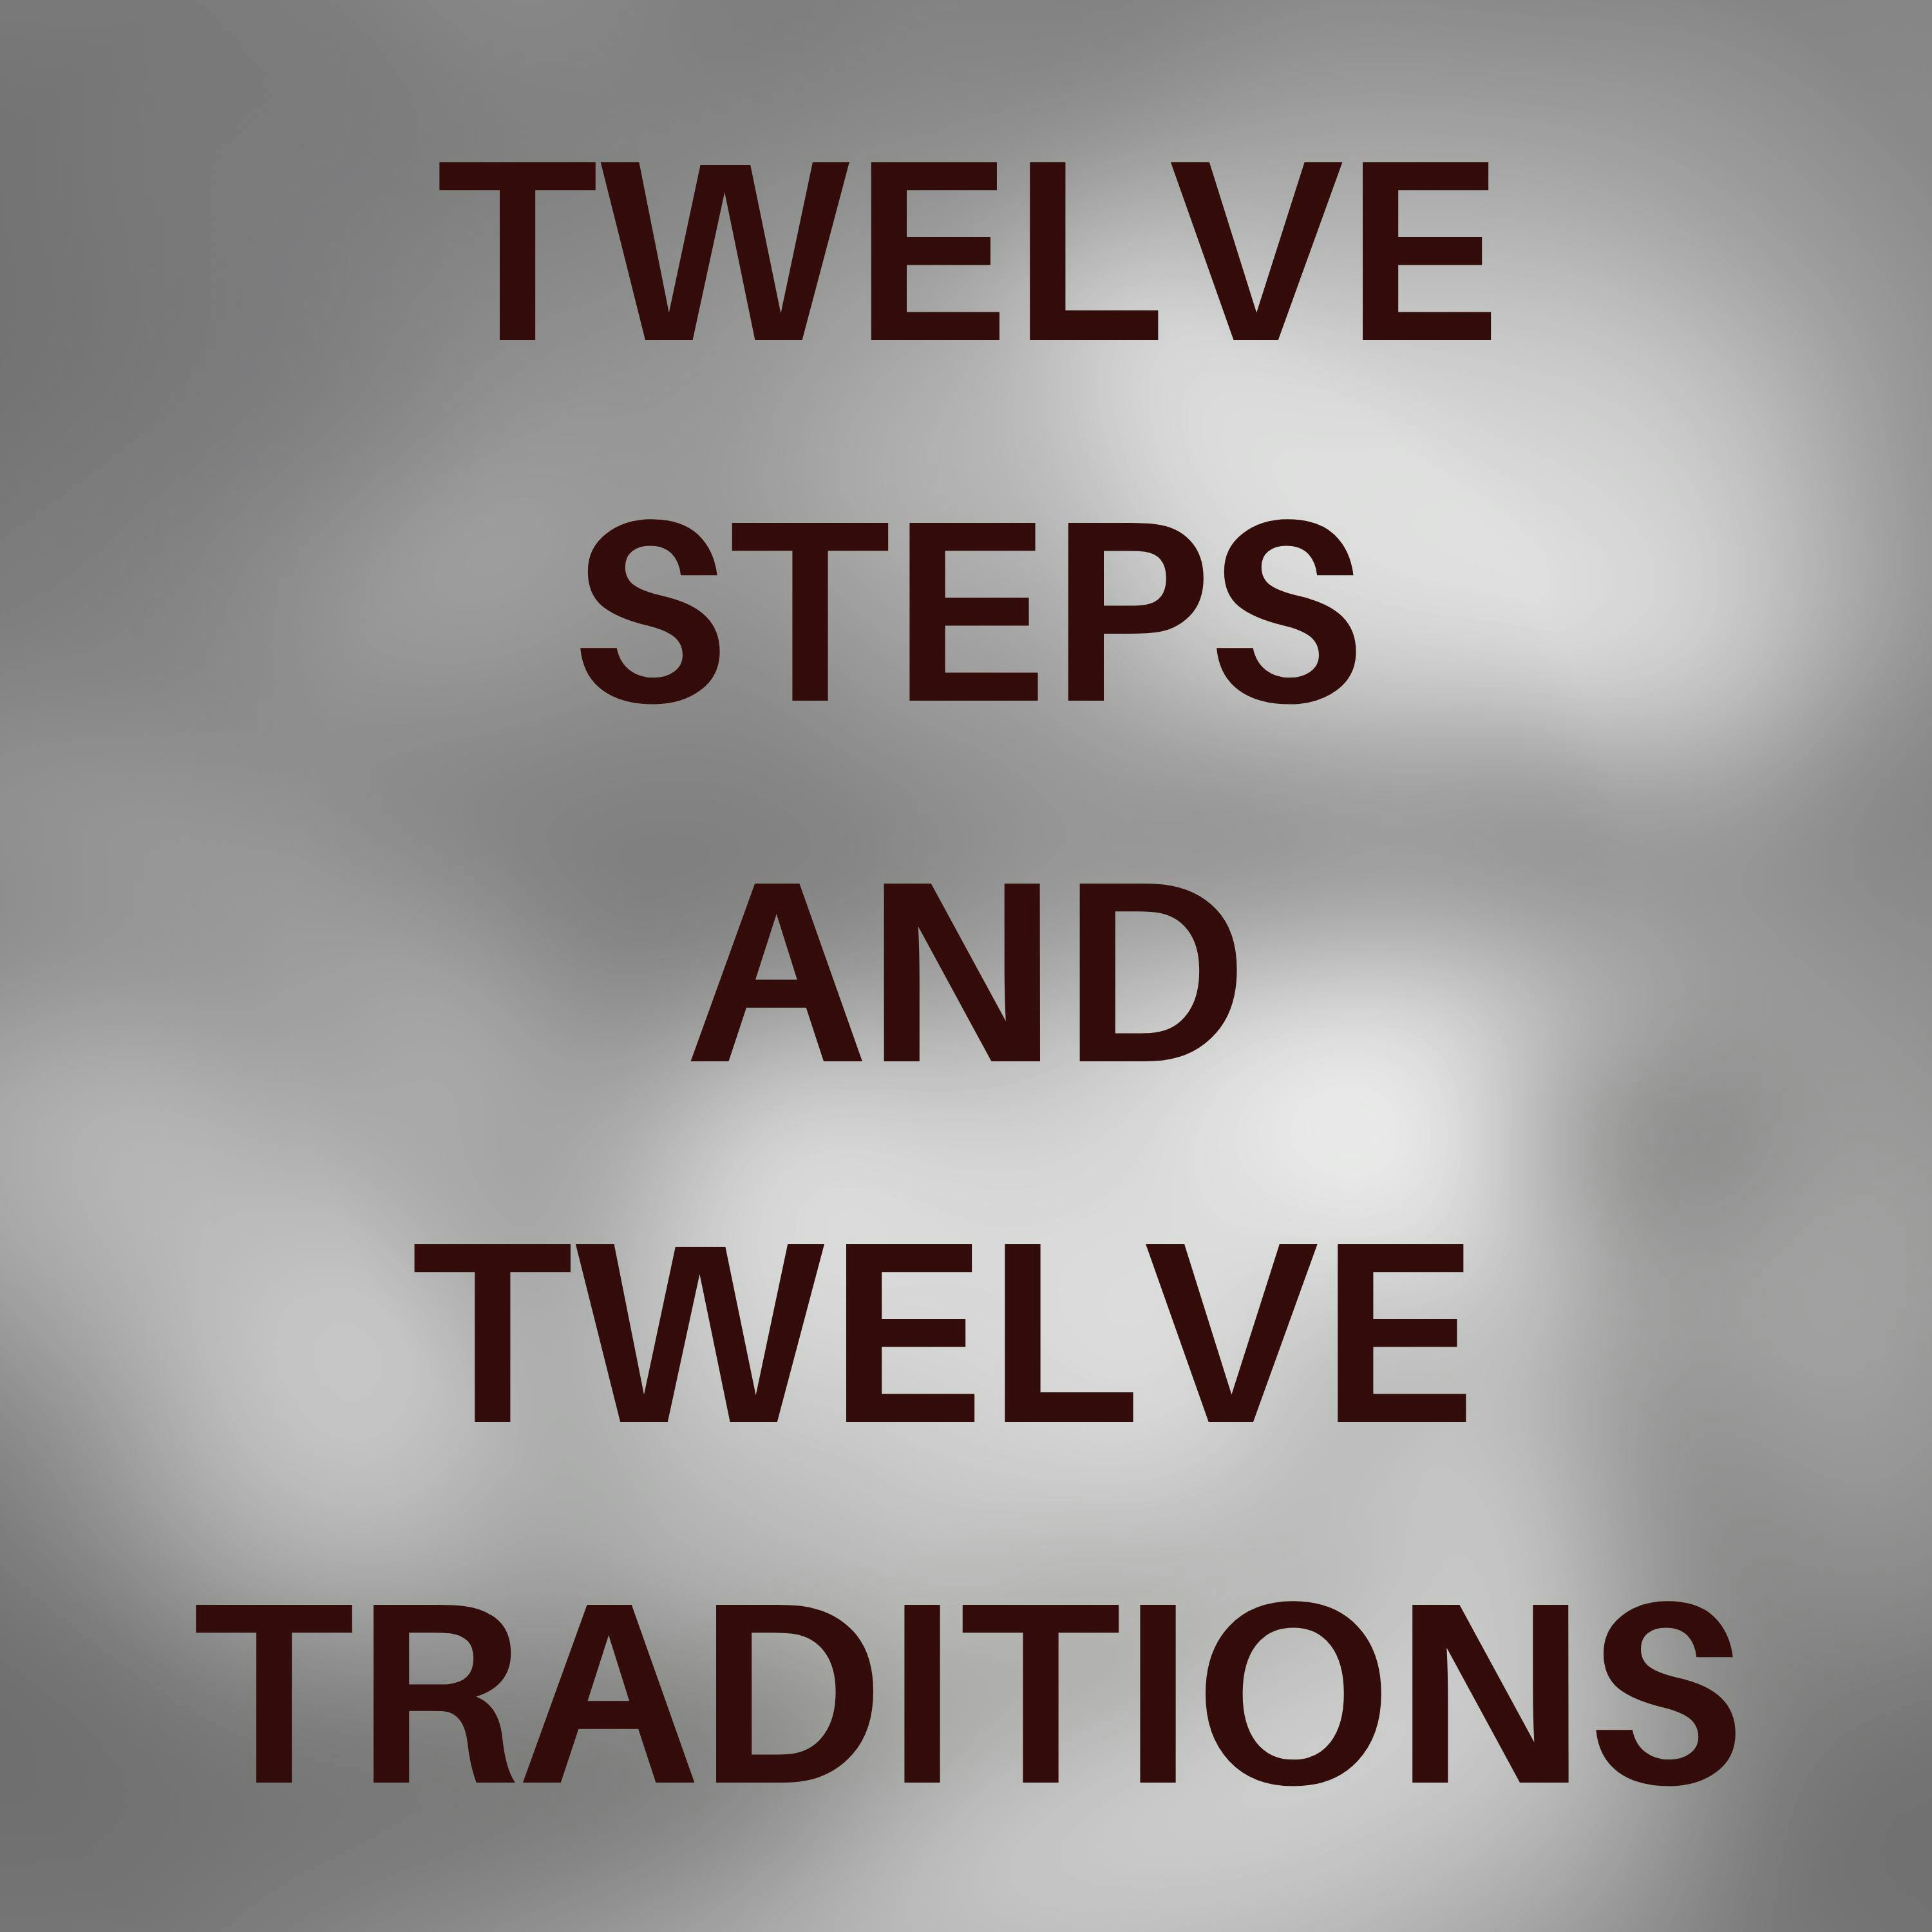 TWELVE STEPS AND TWELVE TRADITIONS - Alcoholics Anonymous